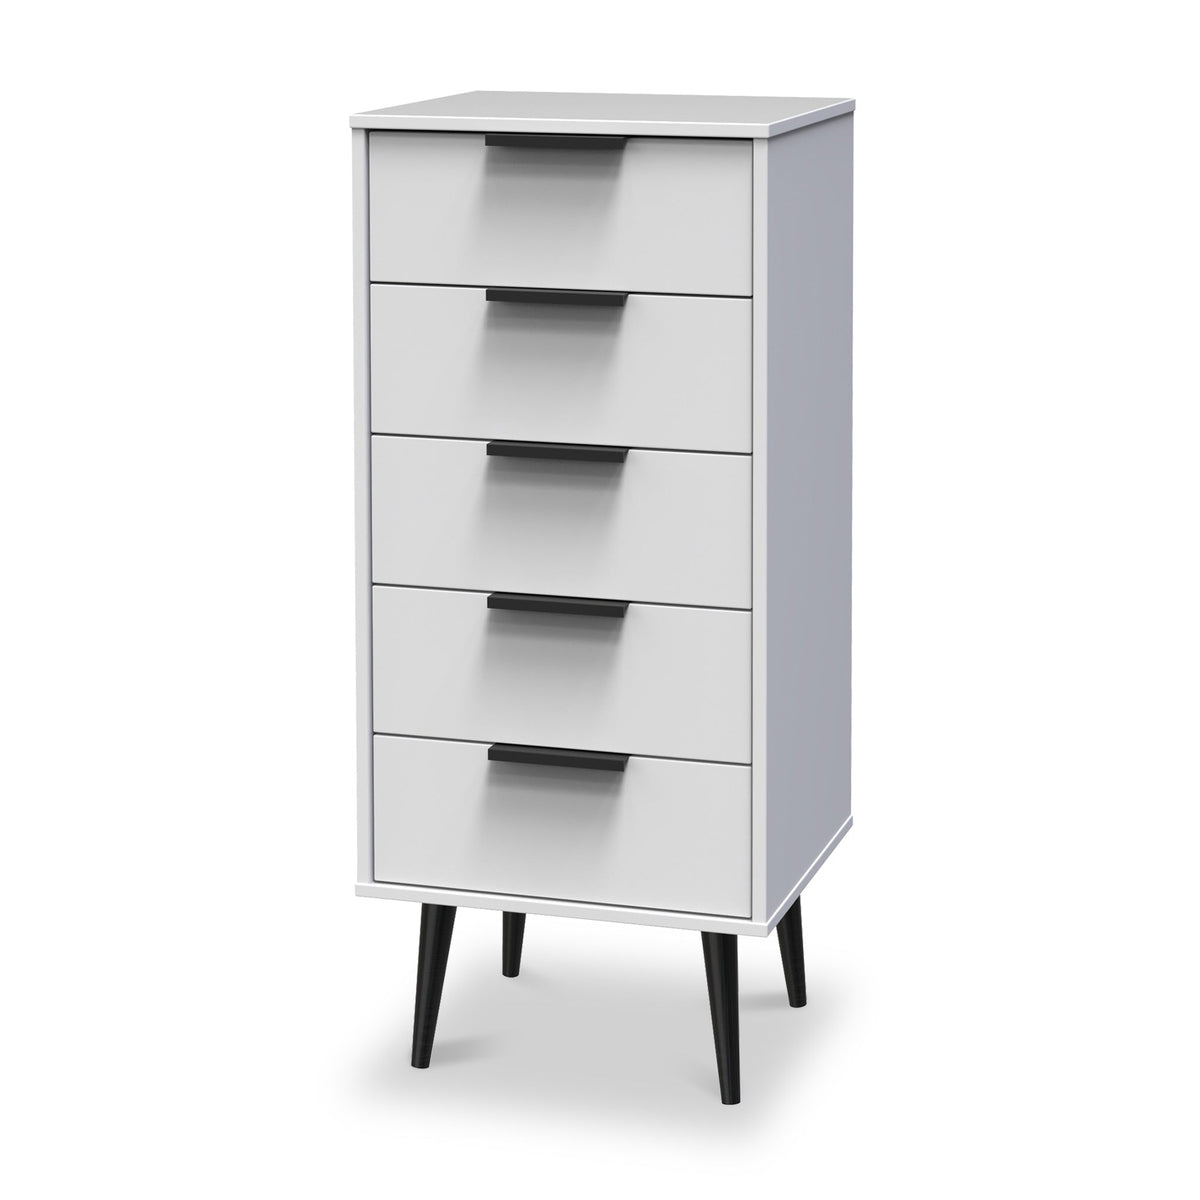 Asher White Tall Narrow 5 Drawer Storage Chest from Roseland Furniture